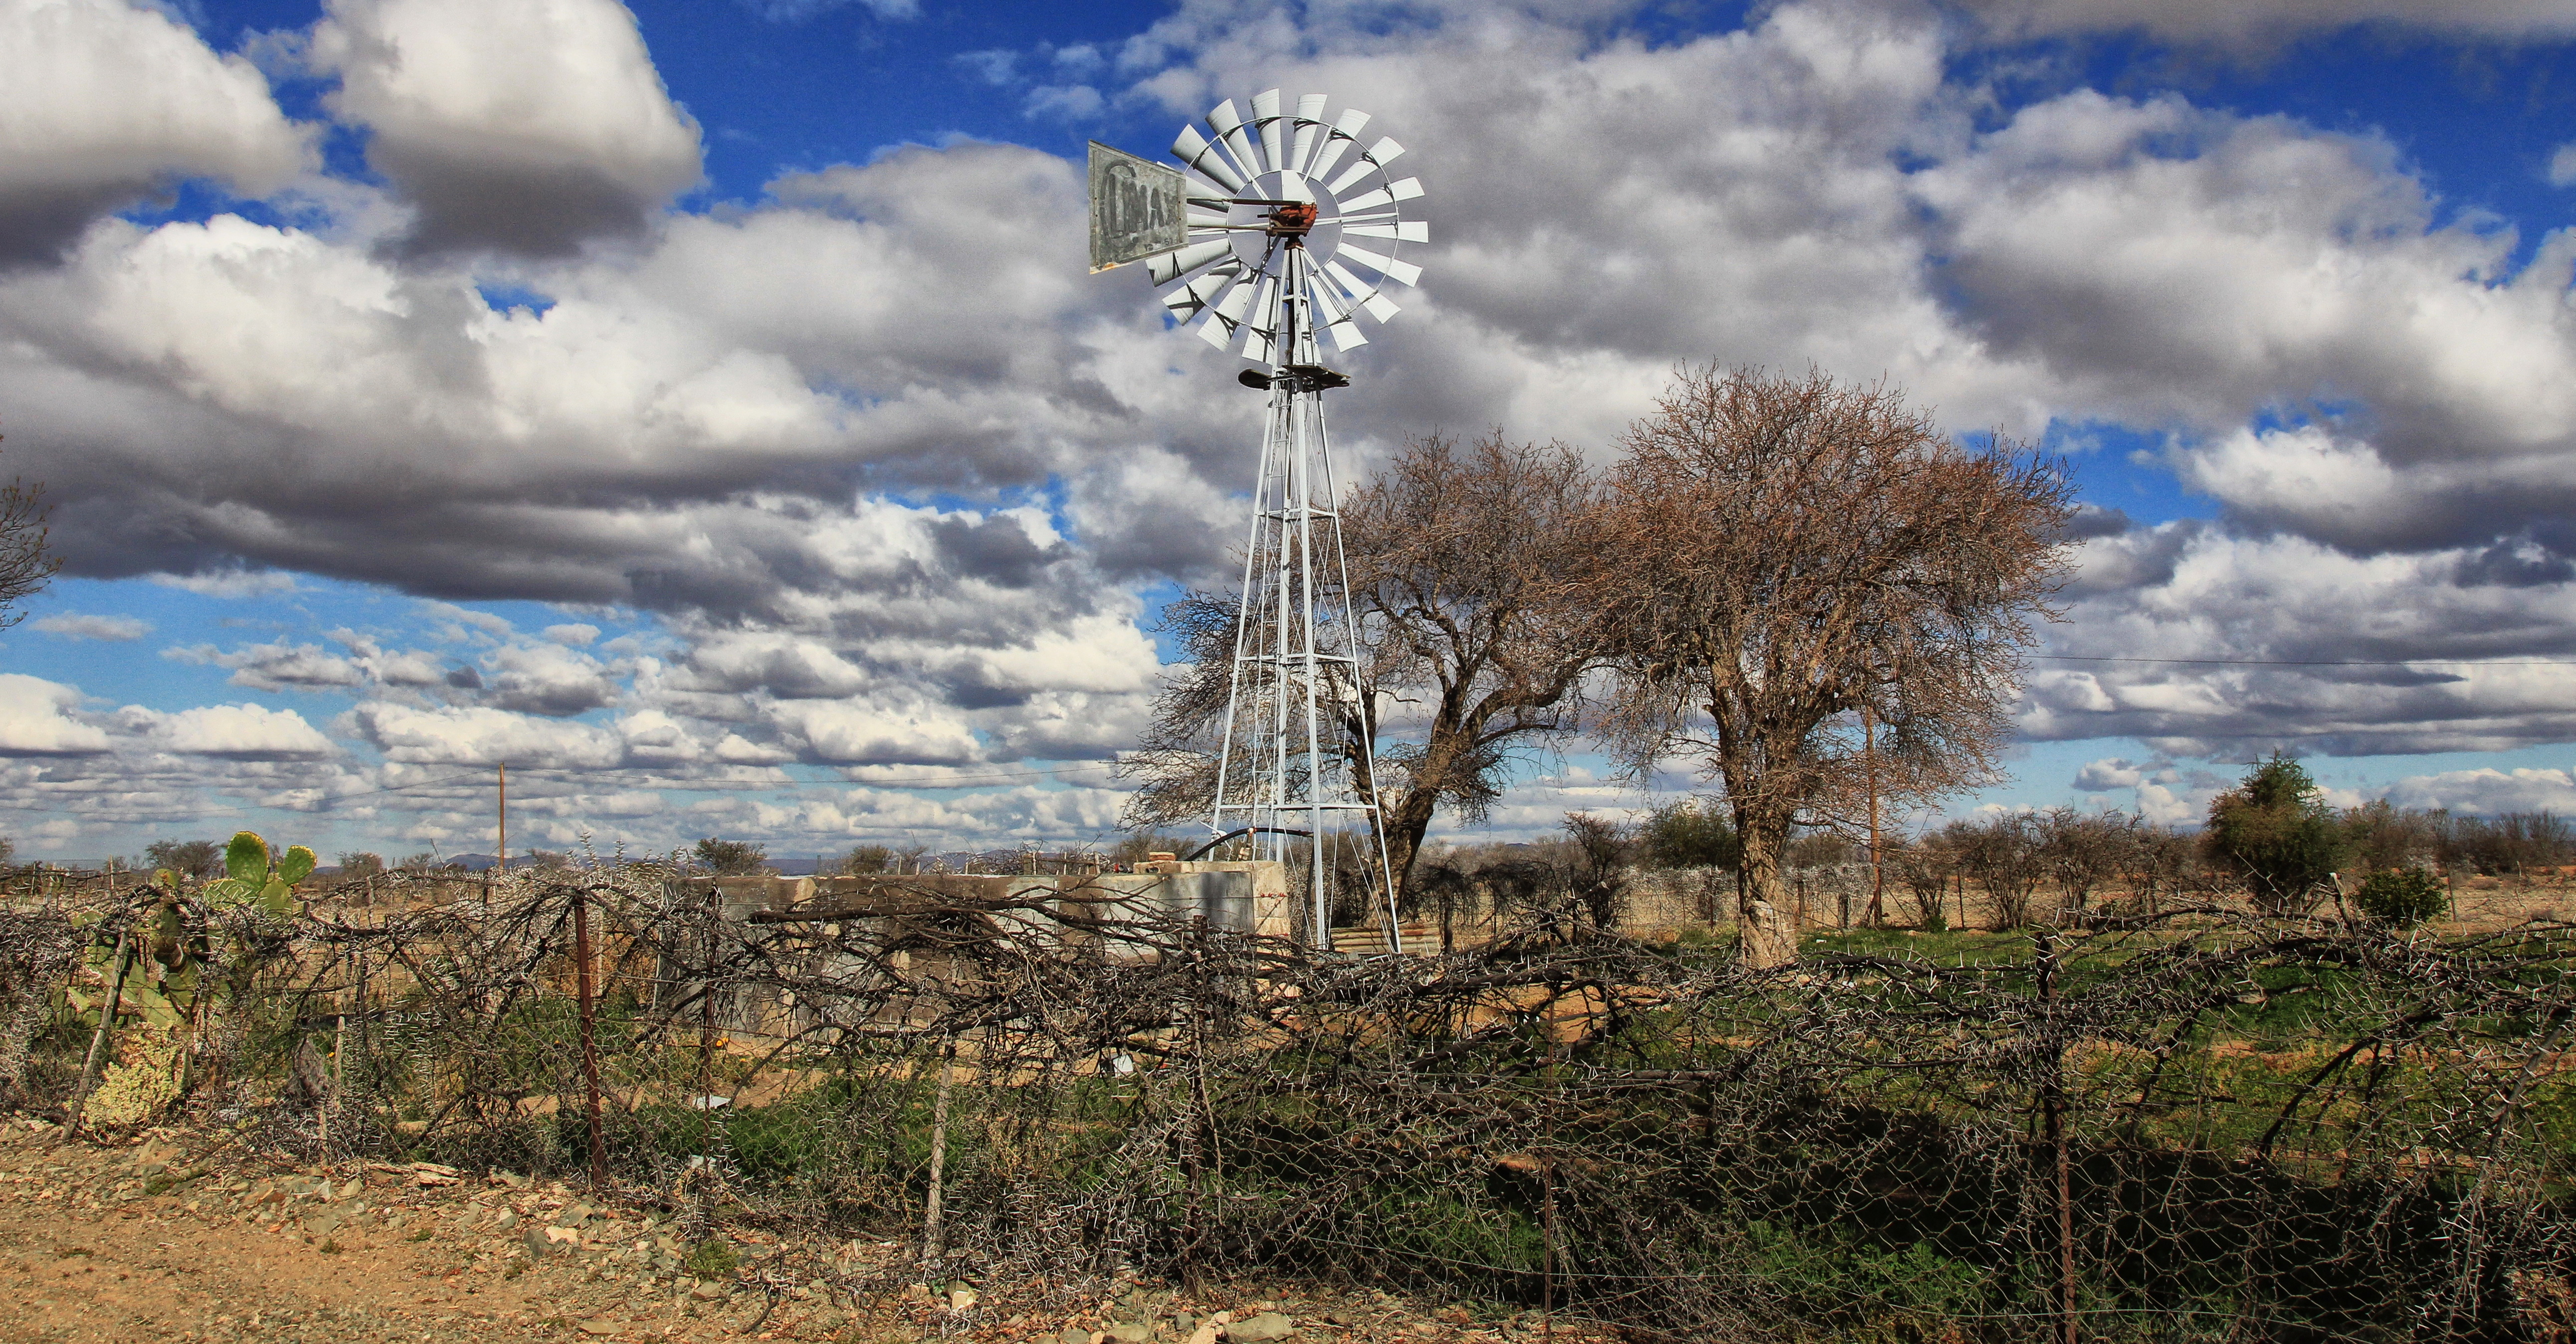 Many backyards sport windpumps, spinning in the breeze and pulling up sweet water. Image: Chris Marais